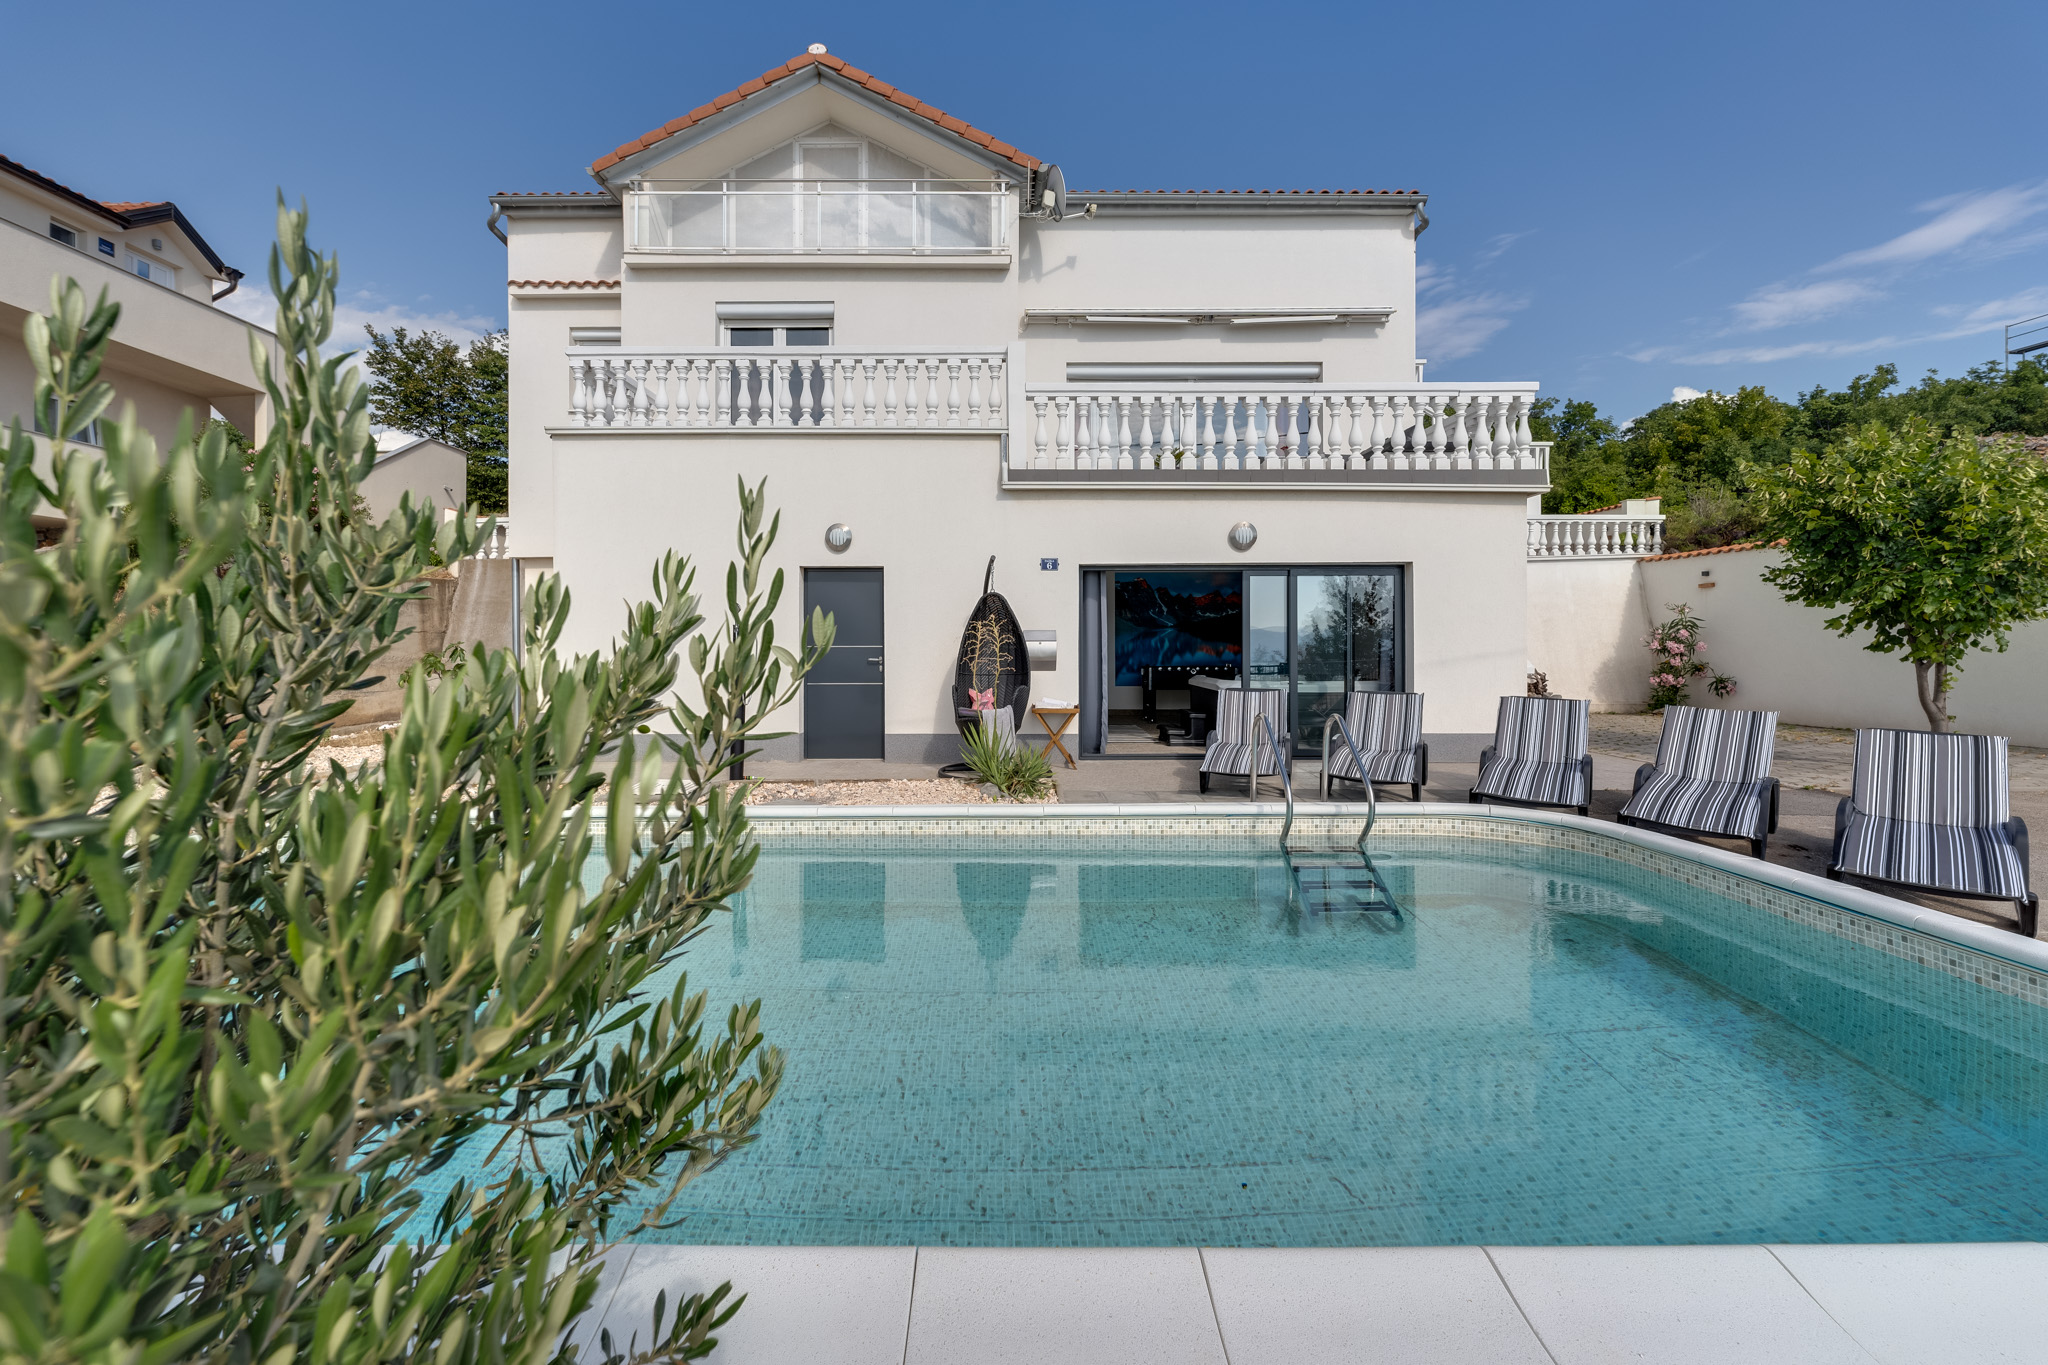 Villa in a quiet environment, with a beautiful panoramic view and a swimming pool